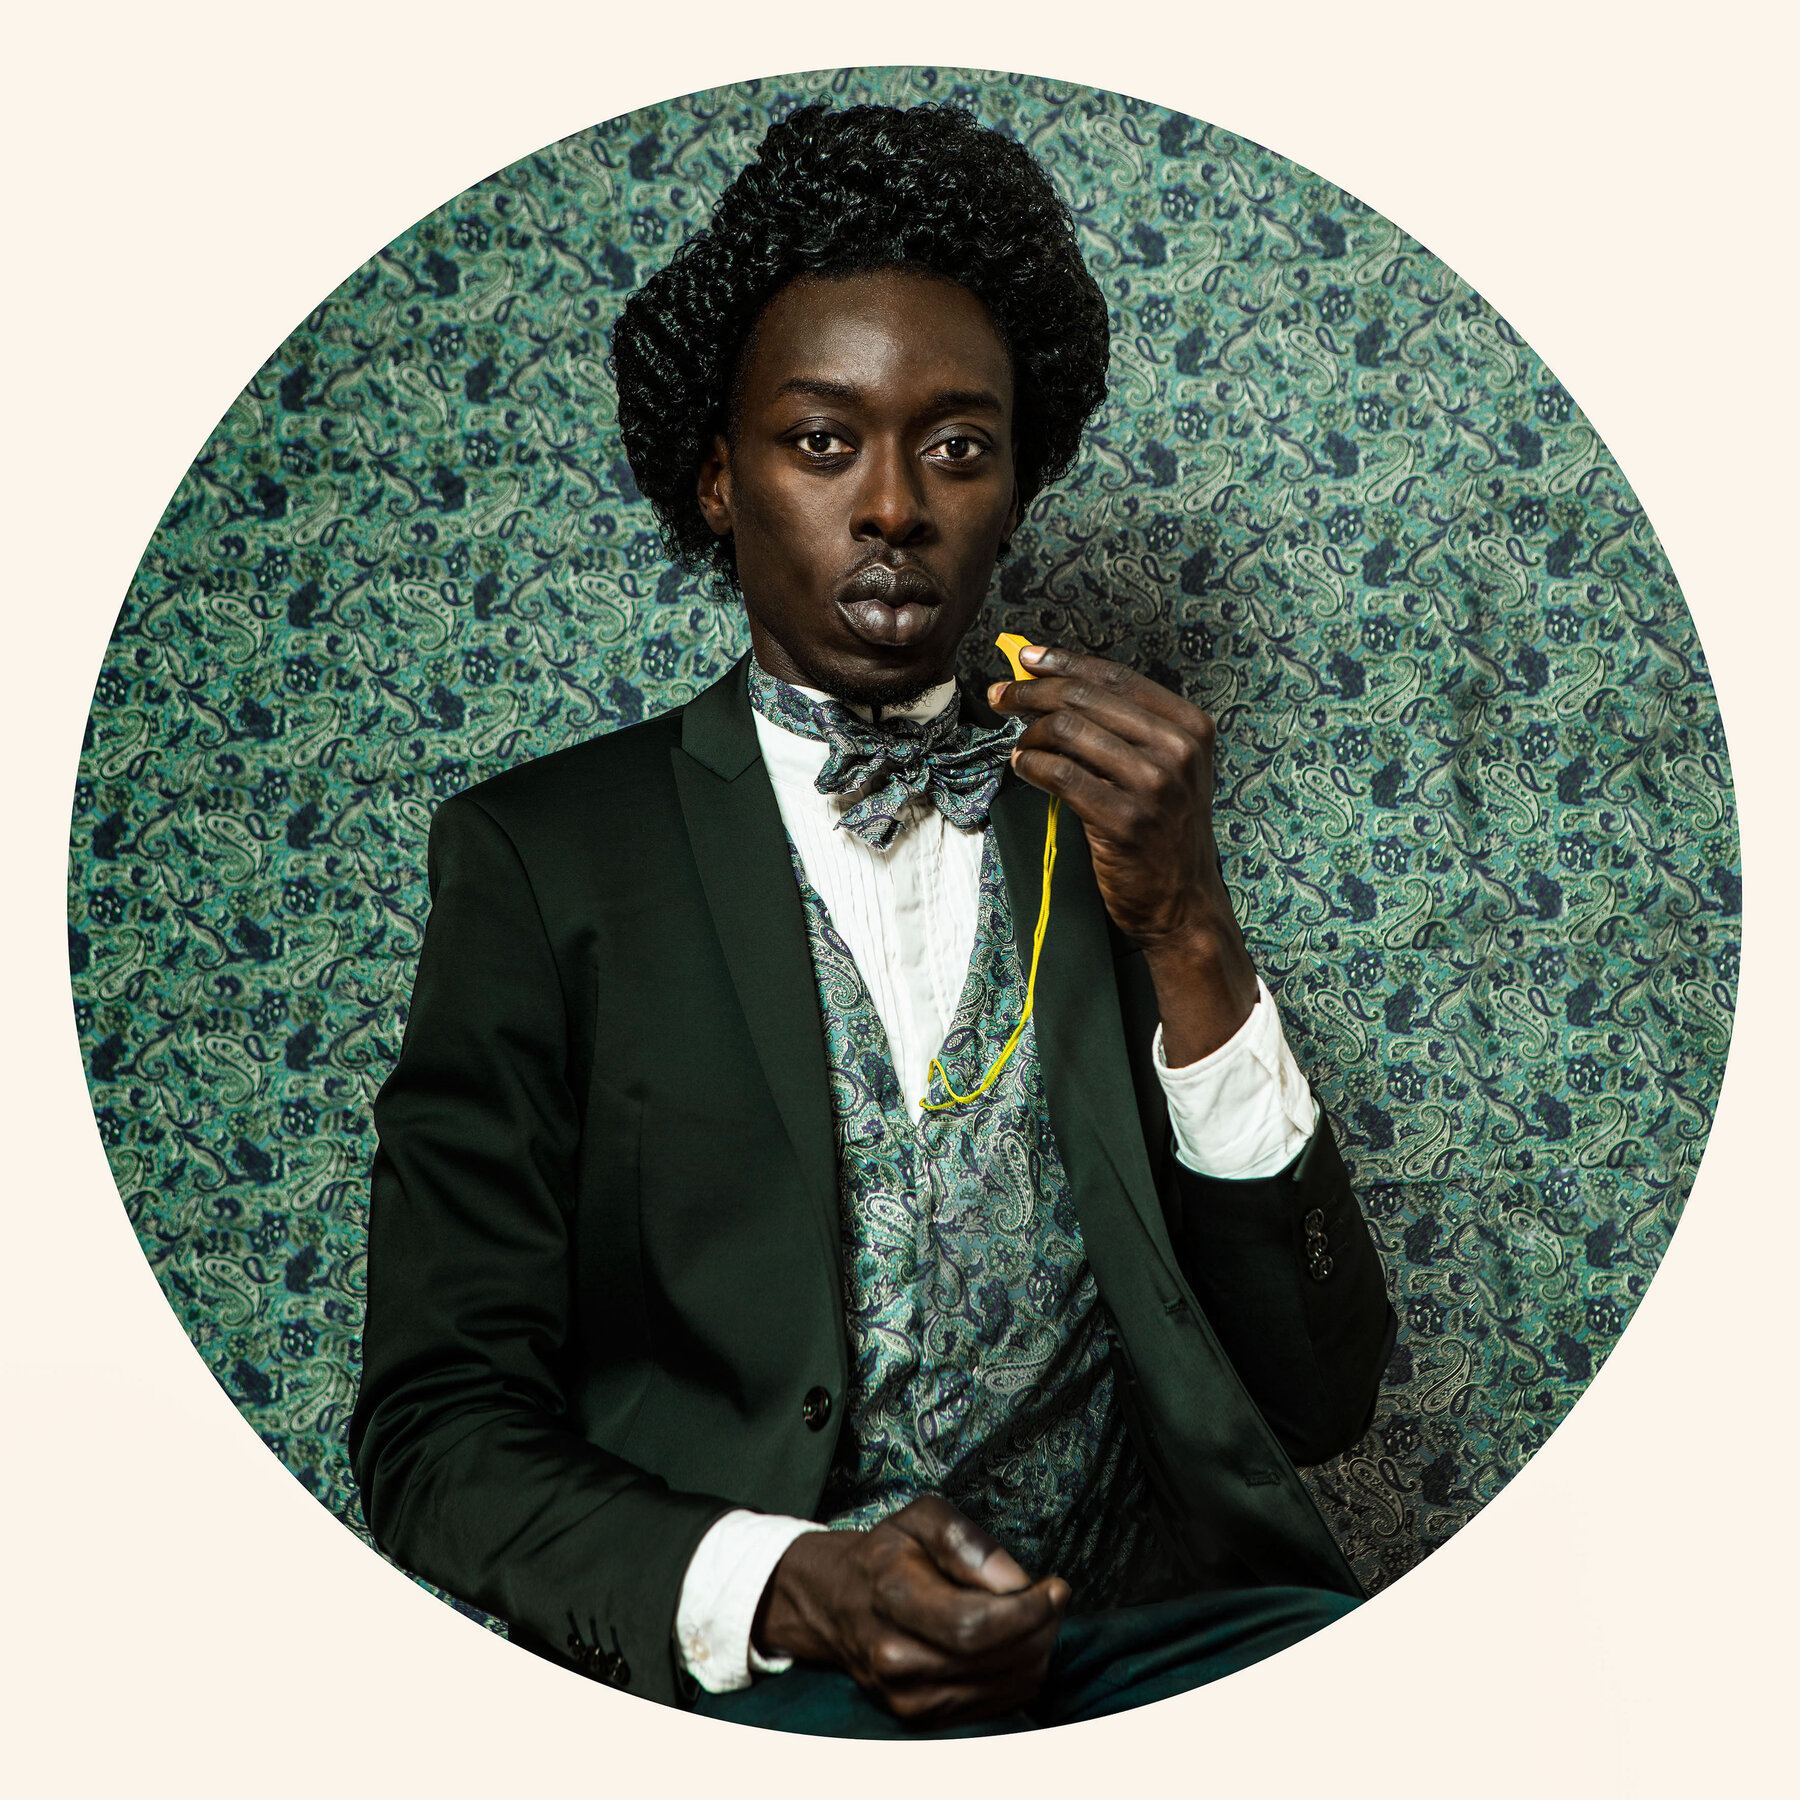 Omar Victor Diop wearing a three-piece dark green suit with a white shirt and holding a yellow whistle close to his lips. His green paisley vest and bow tie match the background behind him.